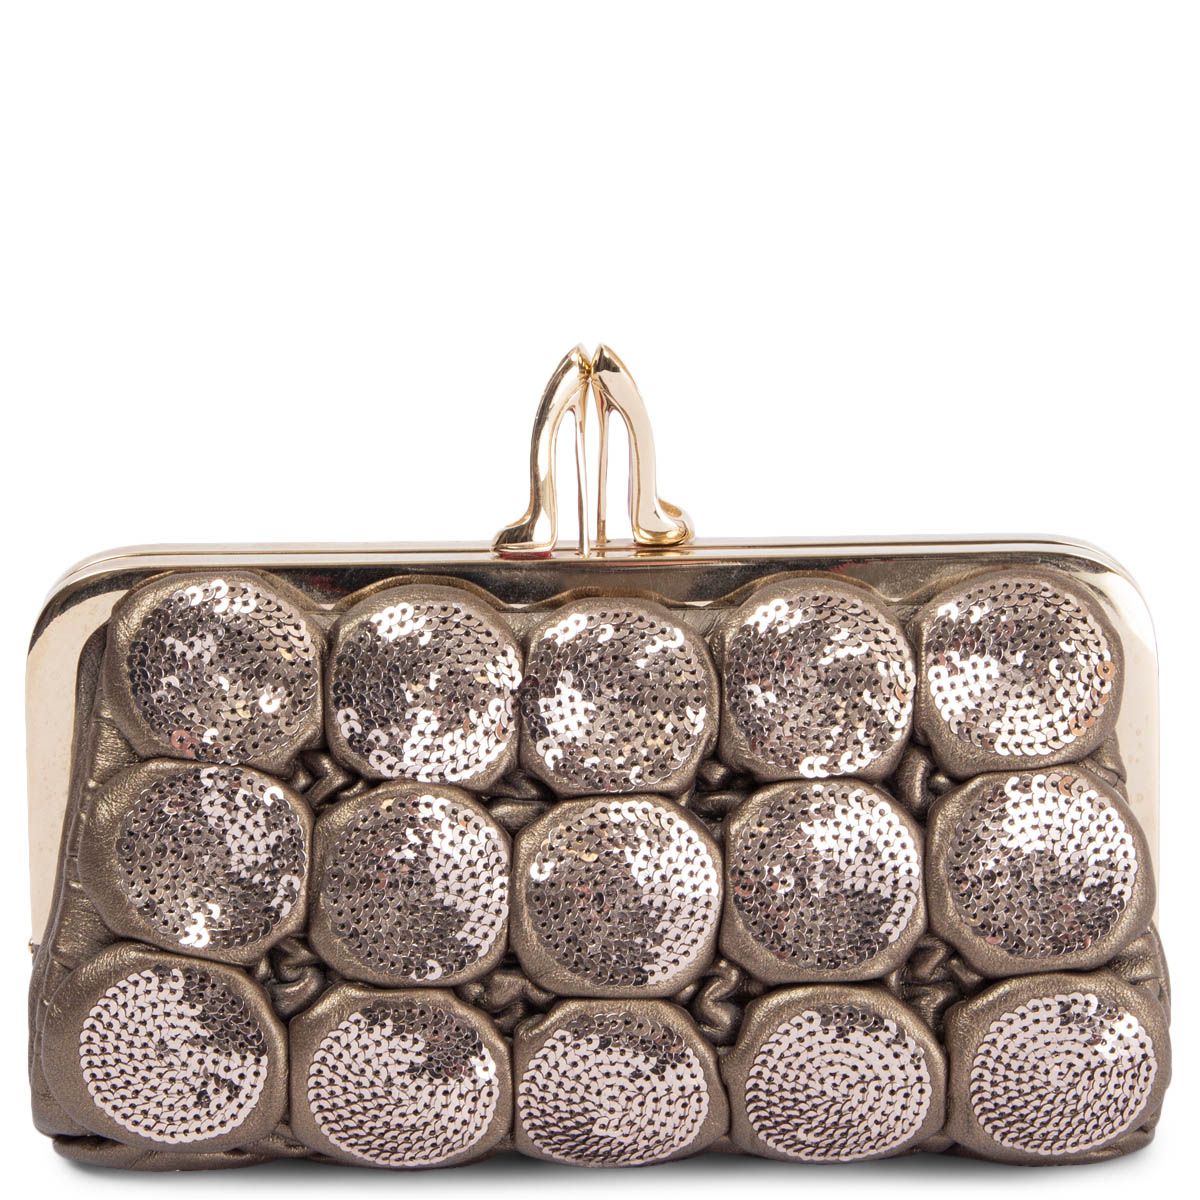 Small evening bag, Sequins & silver-tone metal, black & silver